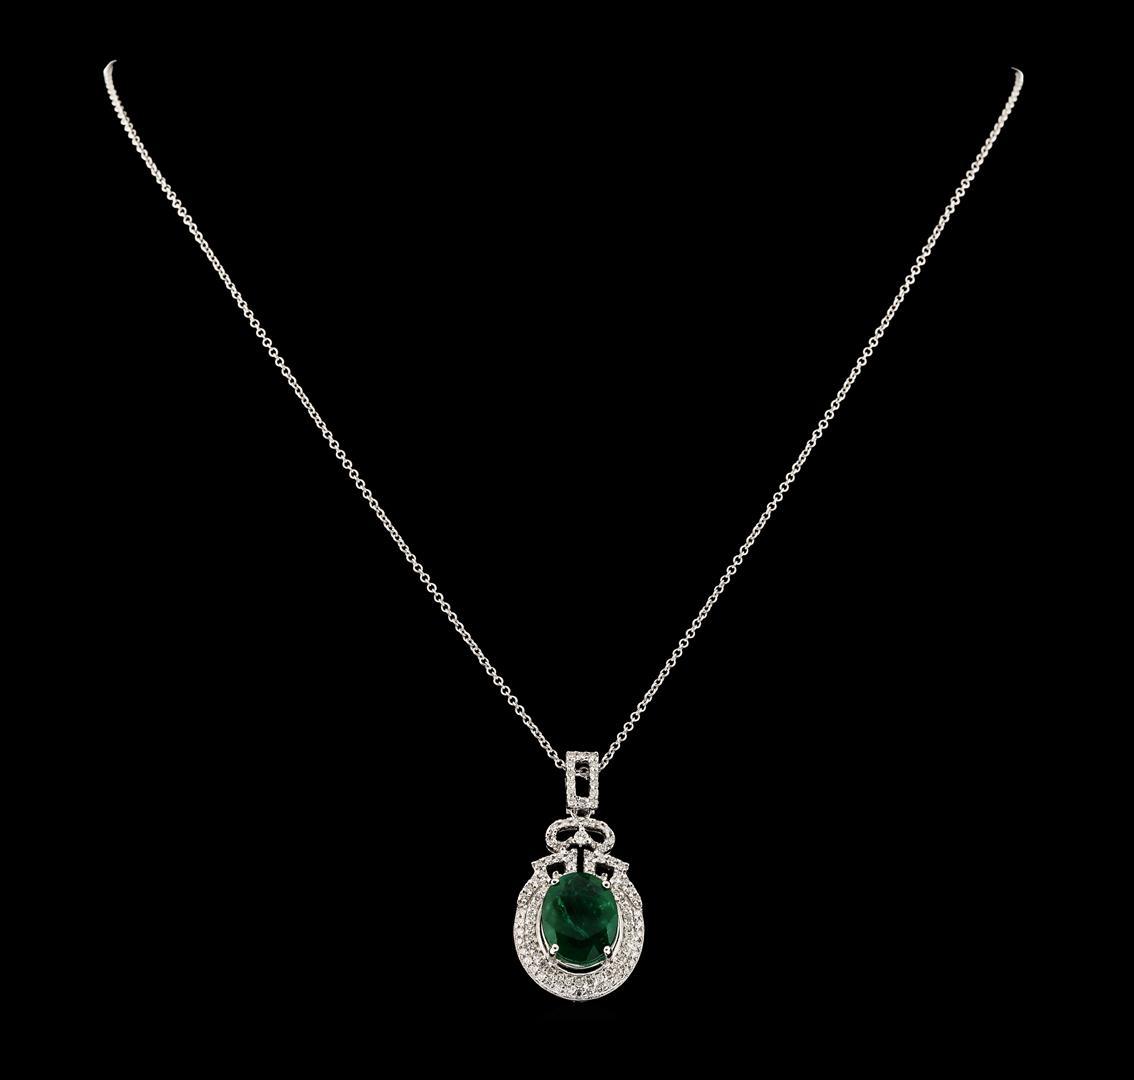 4.26 ctw Emerald and Diamond Pendant With Chain - 14KT White Gold